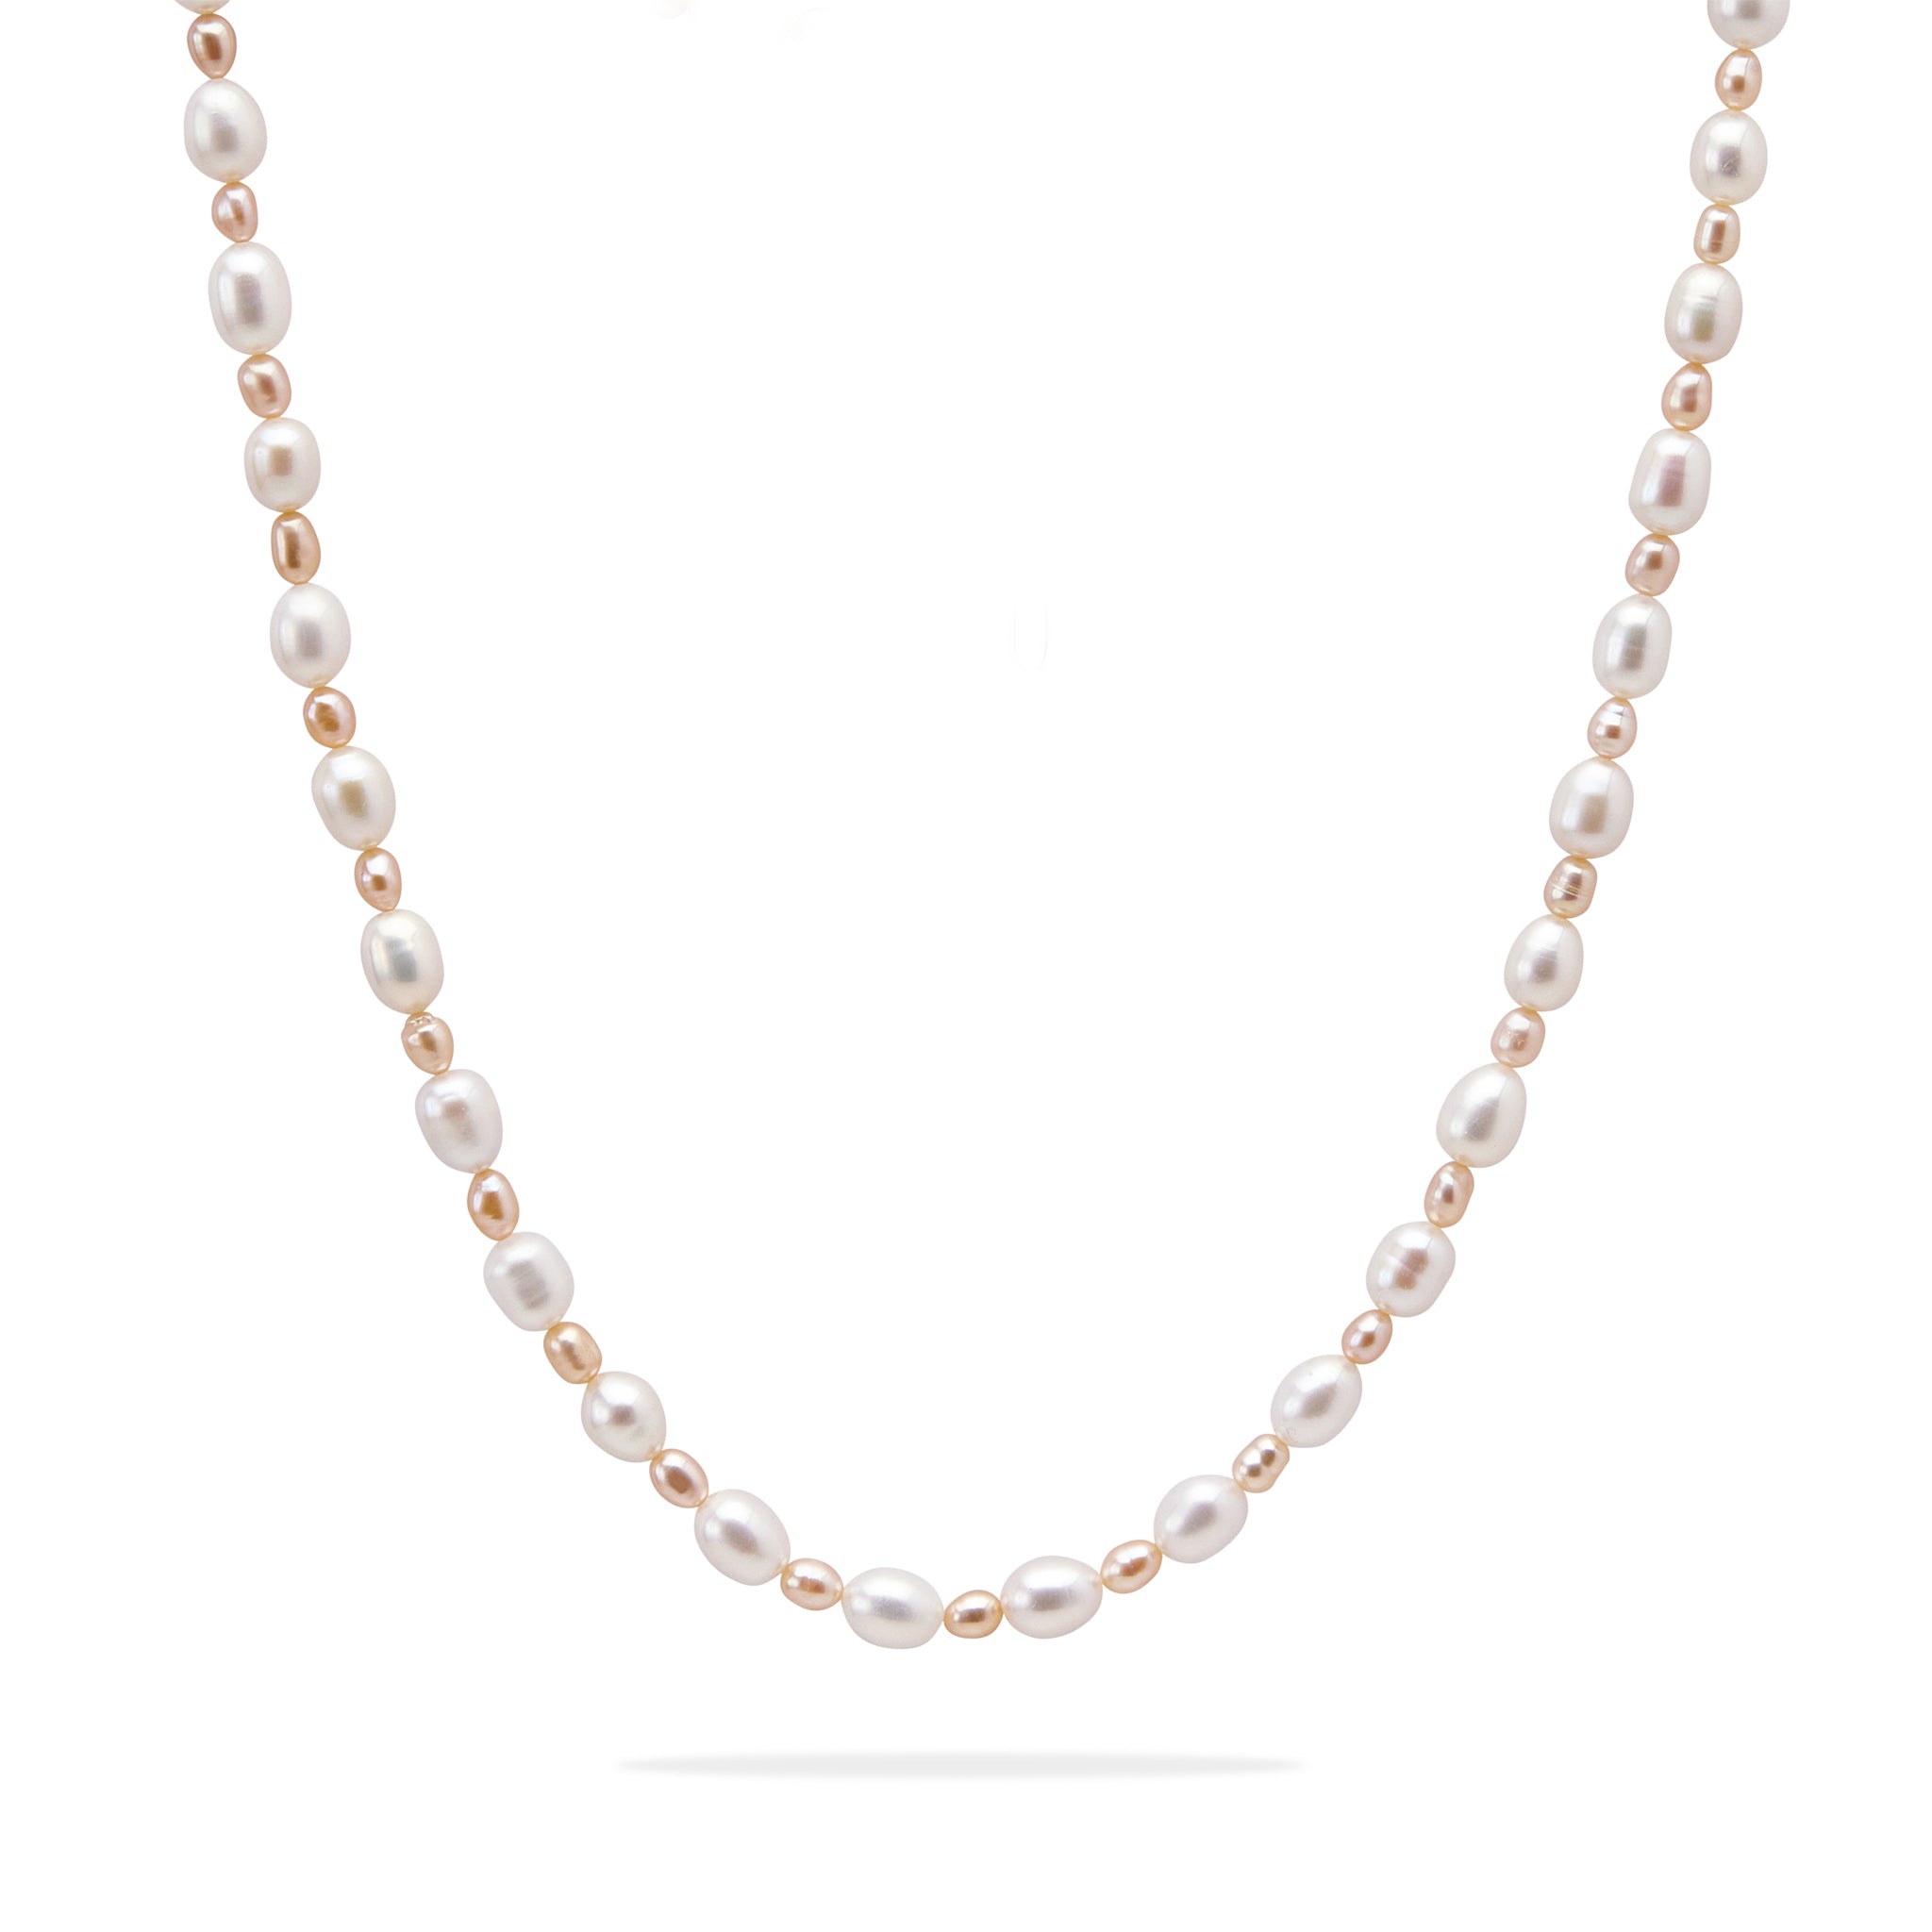 Pearl_Necklace_03.jpg